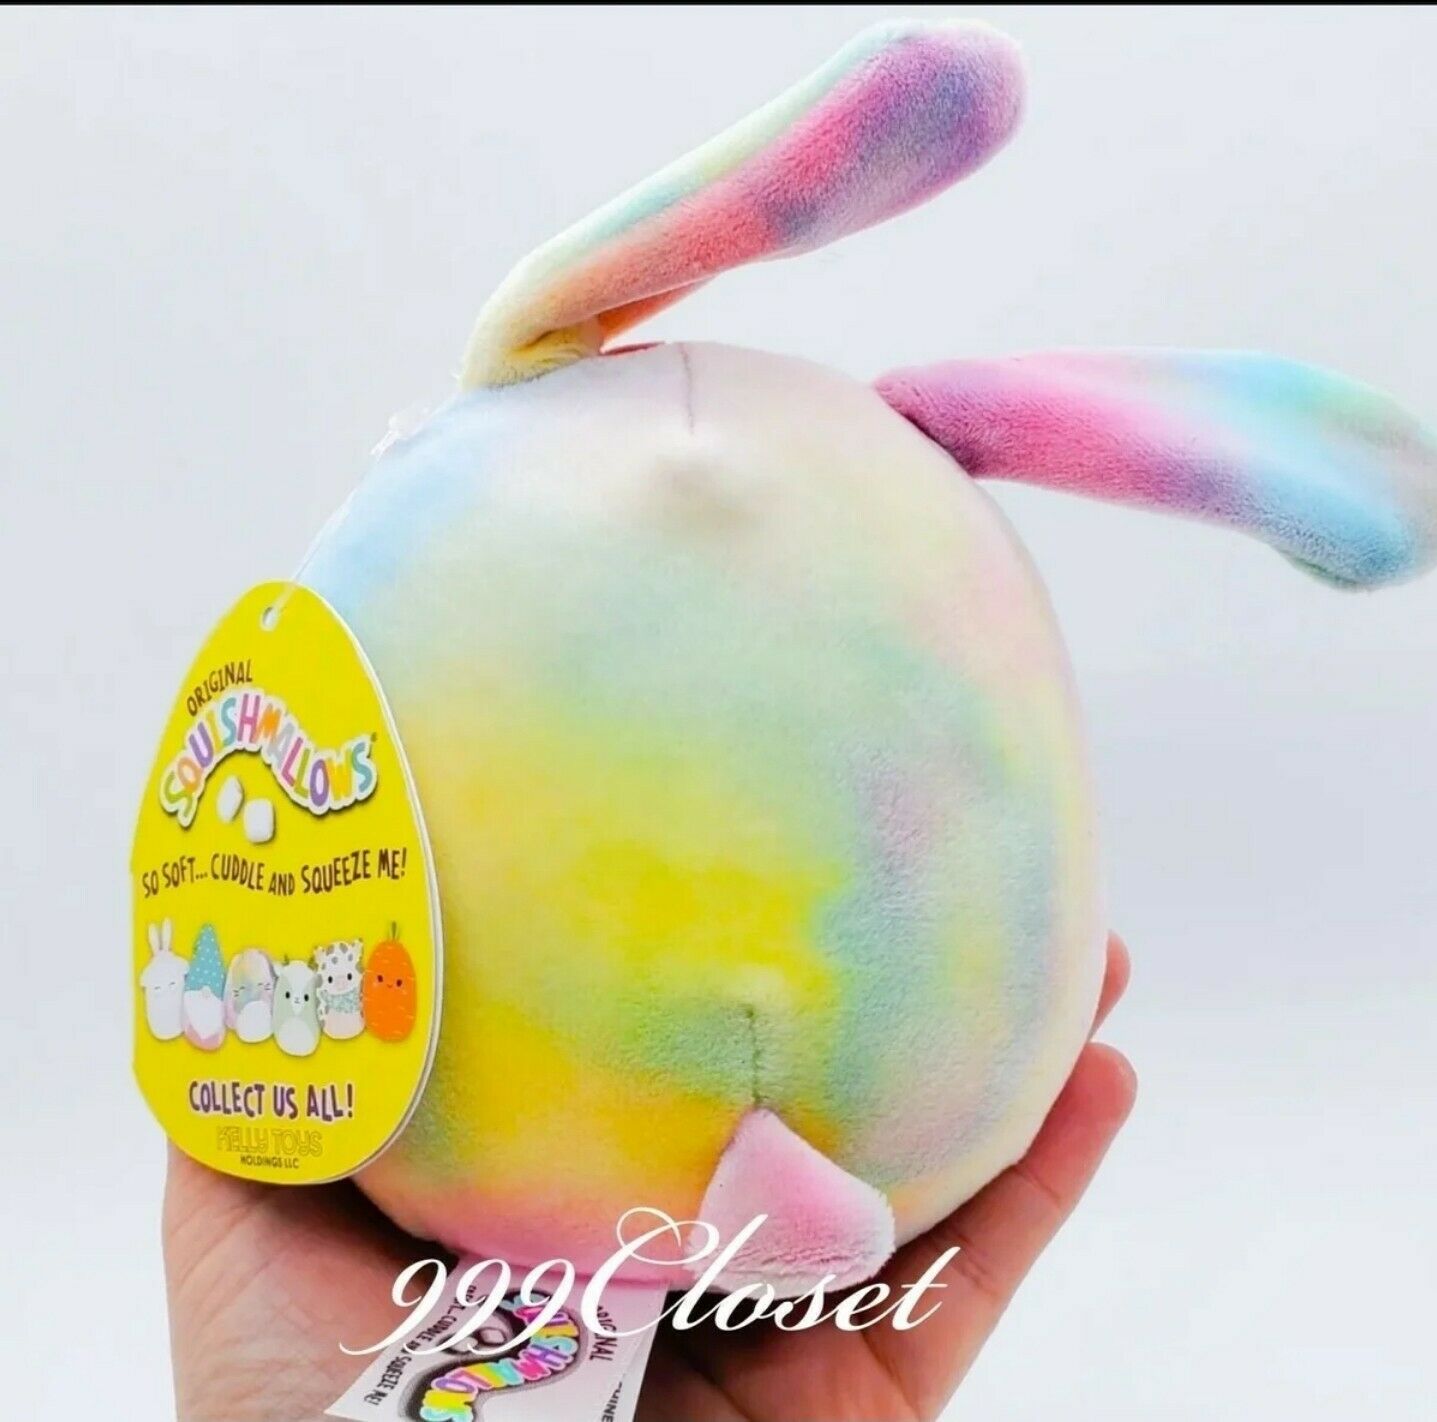 5" Candy The Bunny